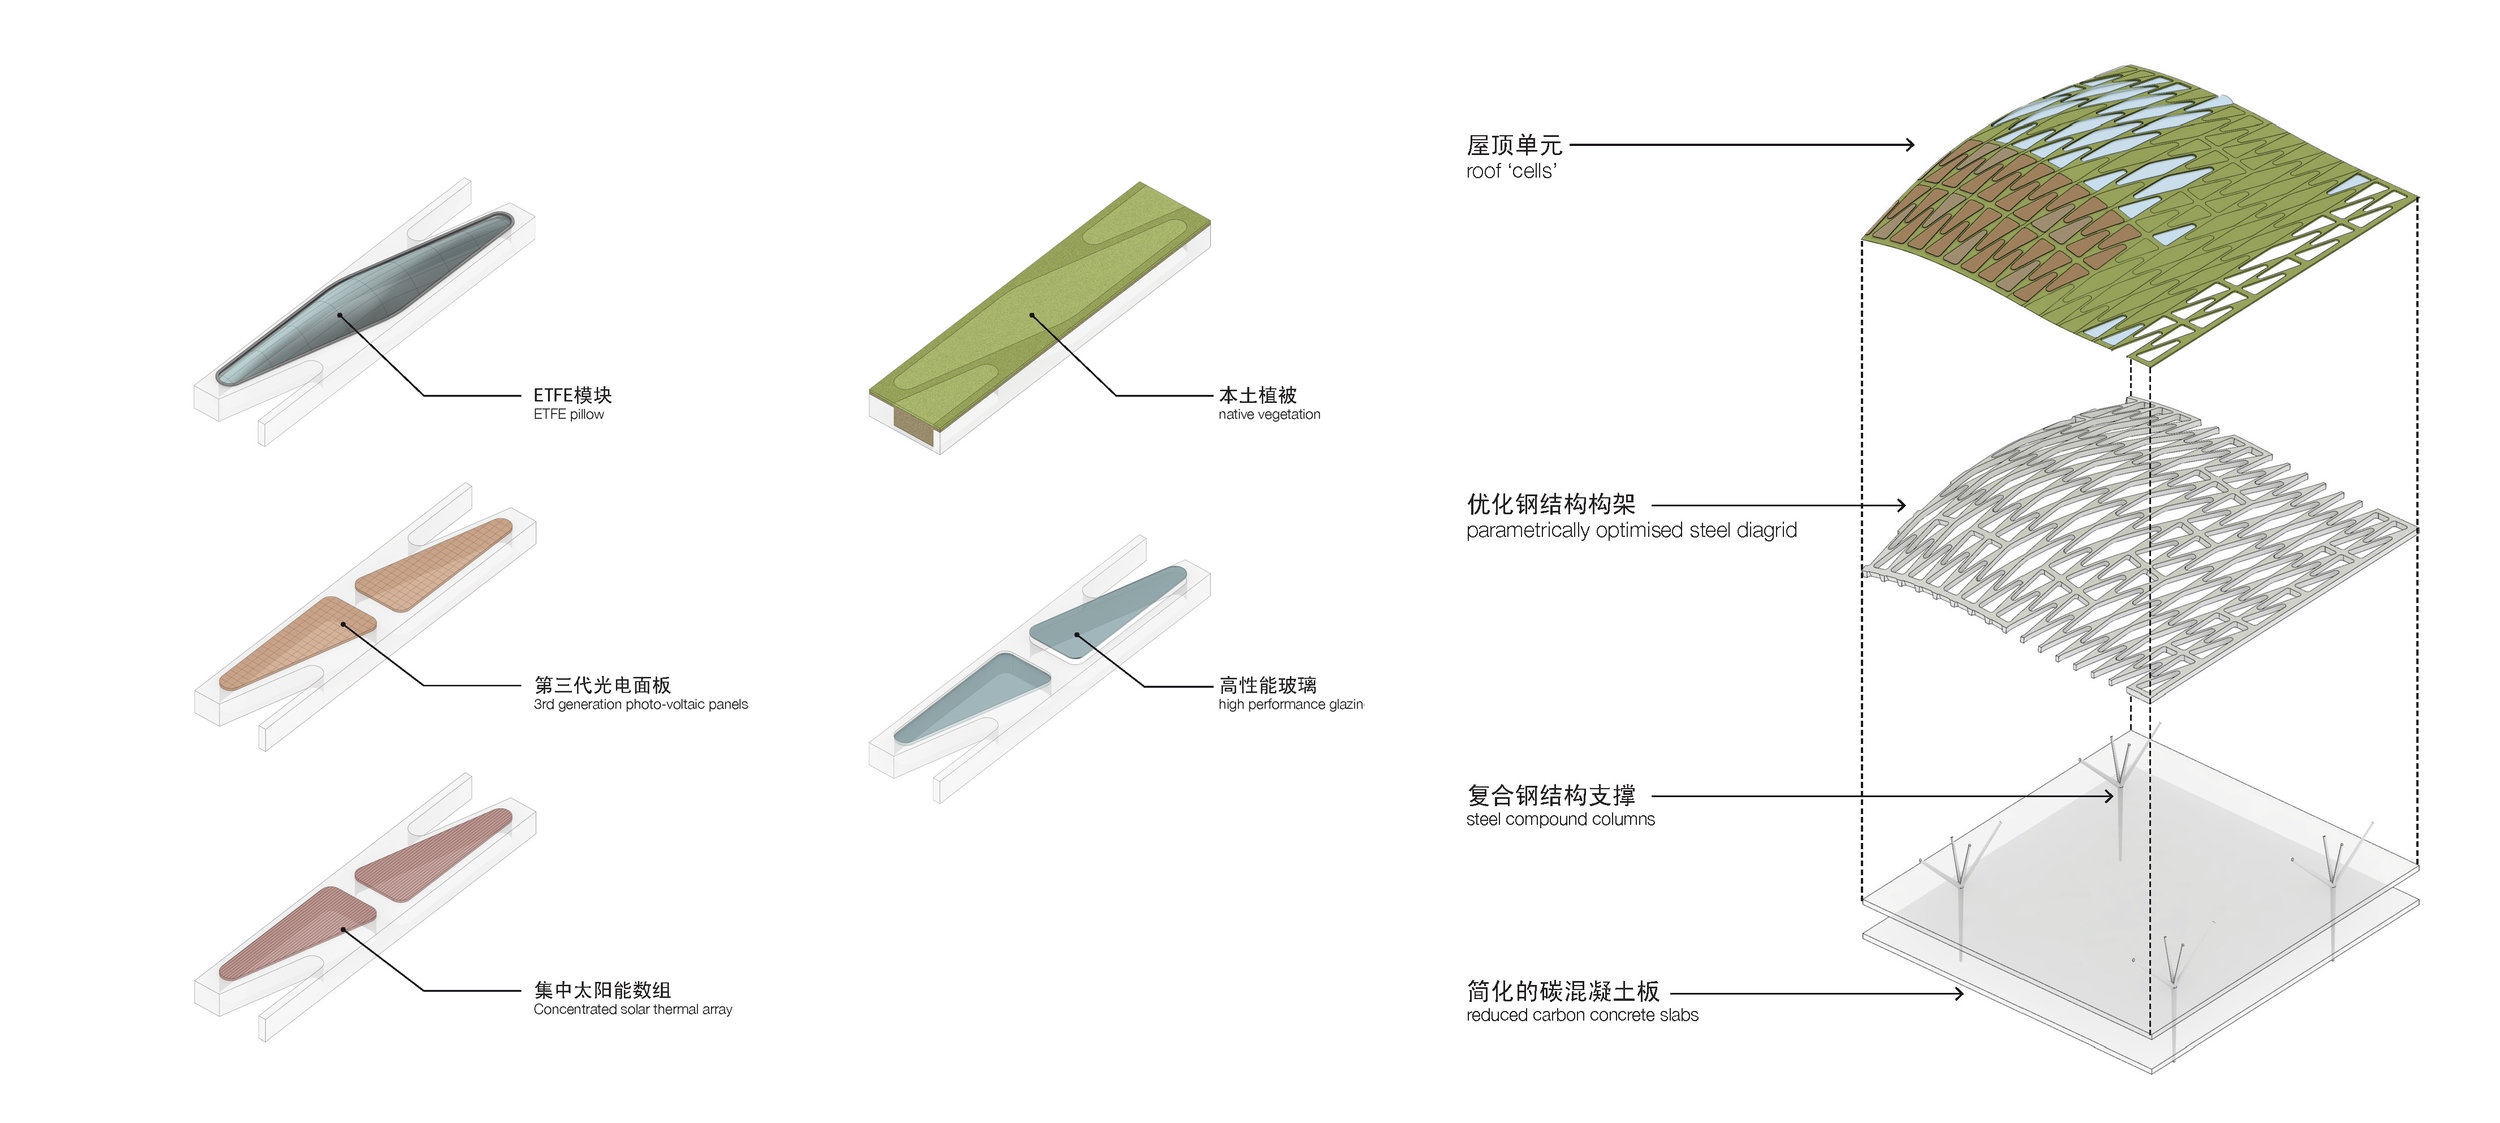 Pages from Dalian_Booklet_Print_Page_CROP_COMP (2017_09_28 21_07_46 UTC).jpg